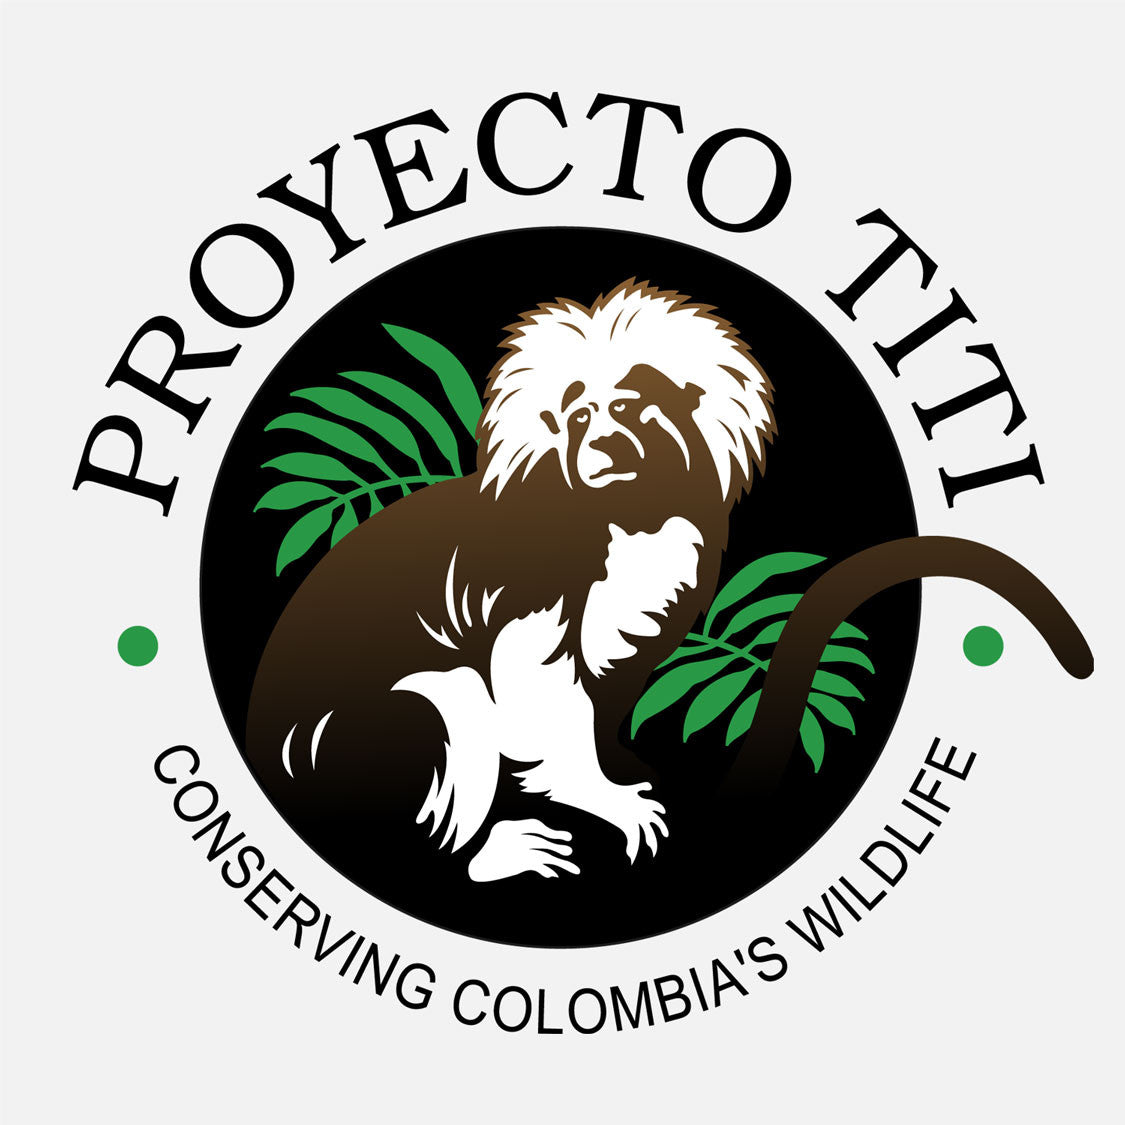 This program is designed to provide useful information to assist in the long-term preservation of the cotton-top tamarin and to develop local community advocates to promote conservation efforts in Colombia.